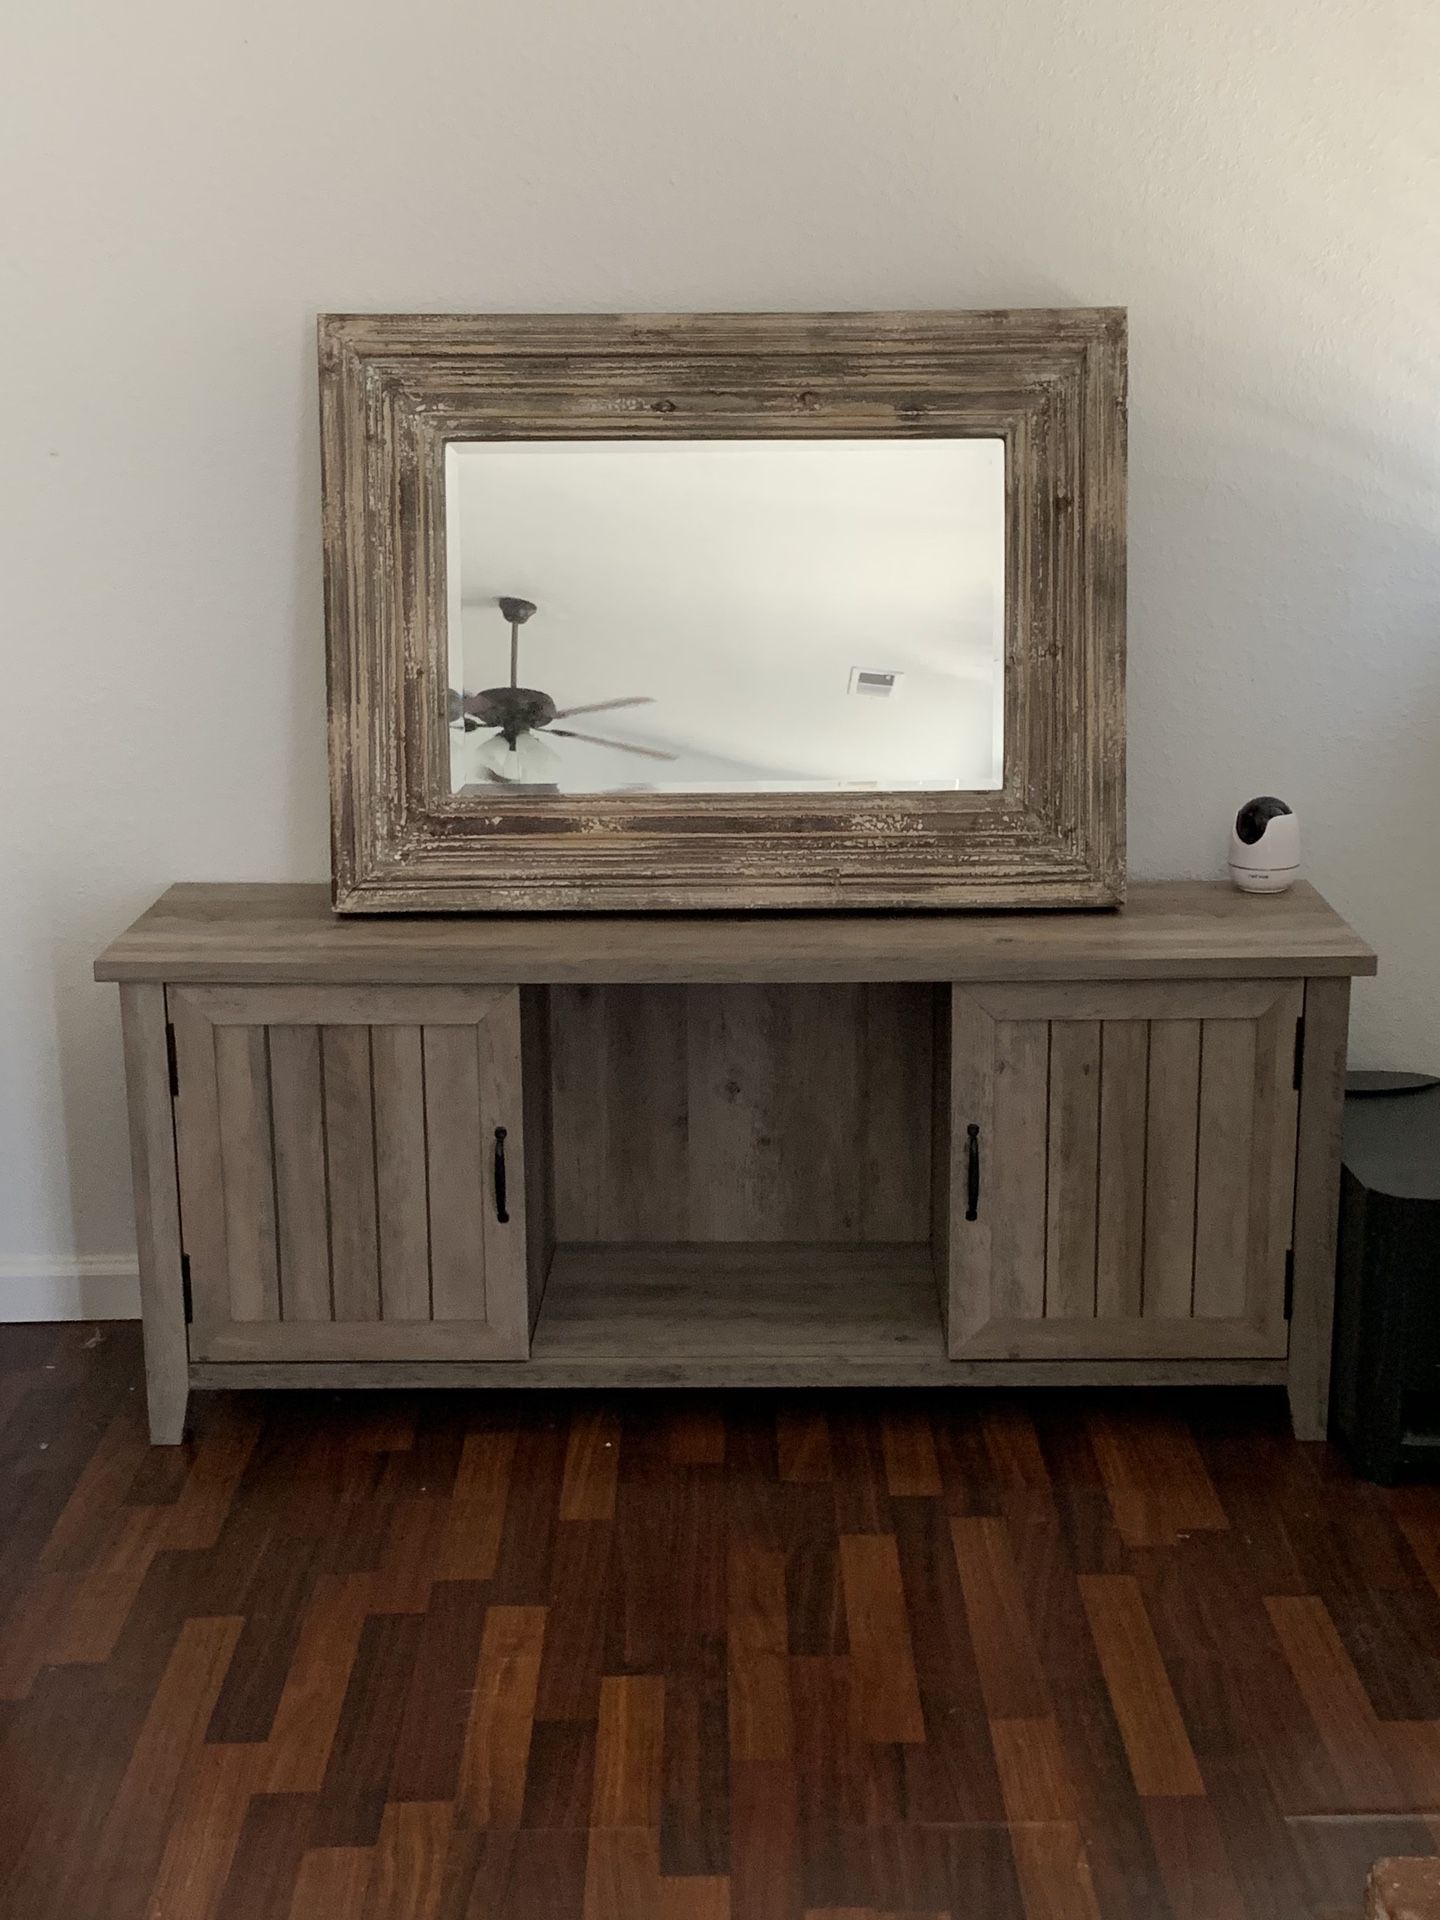 Tv stand and mirror